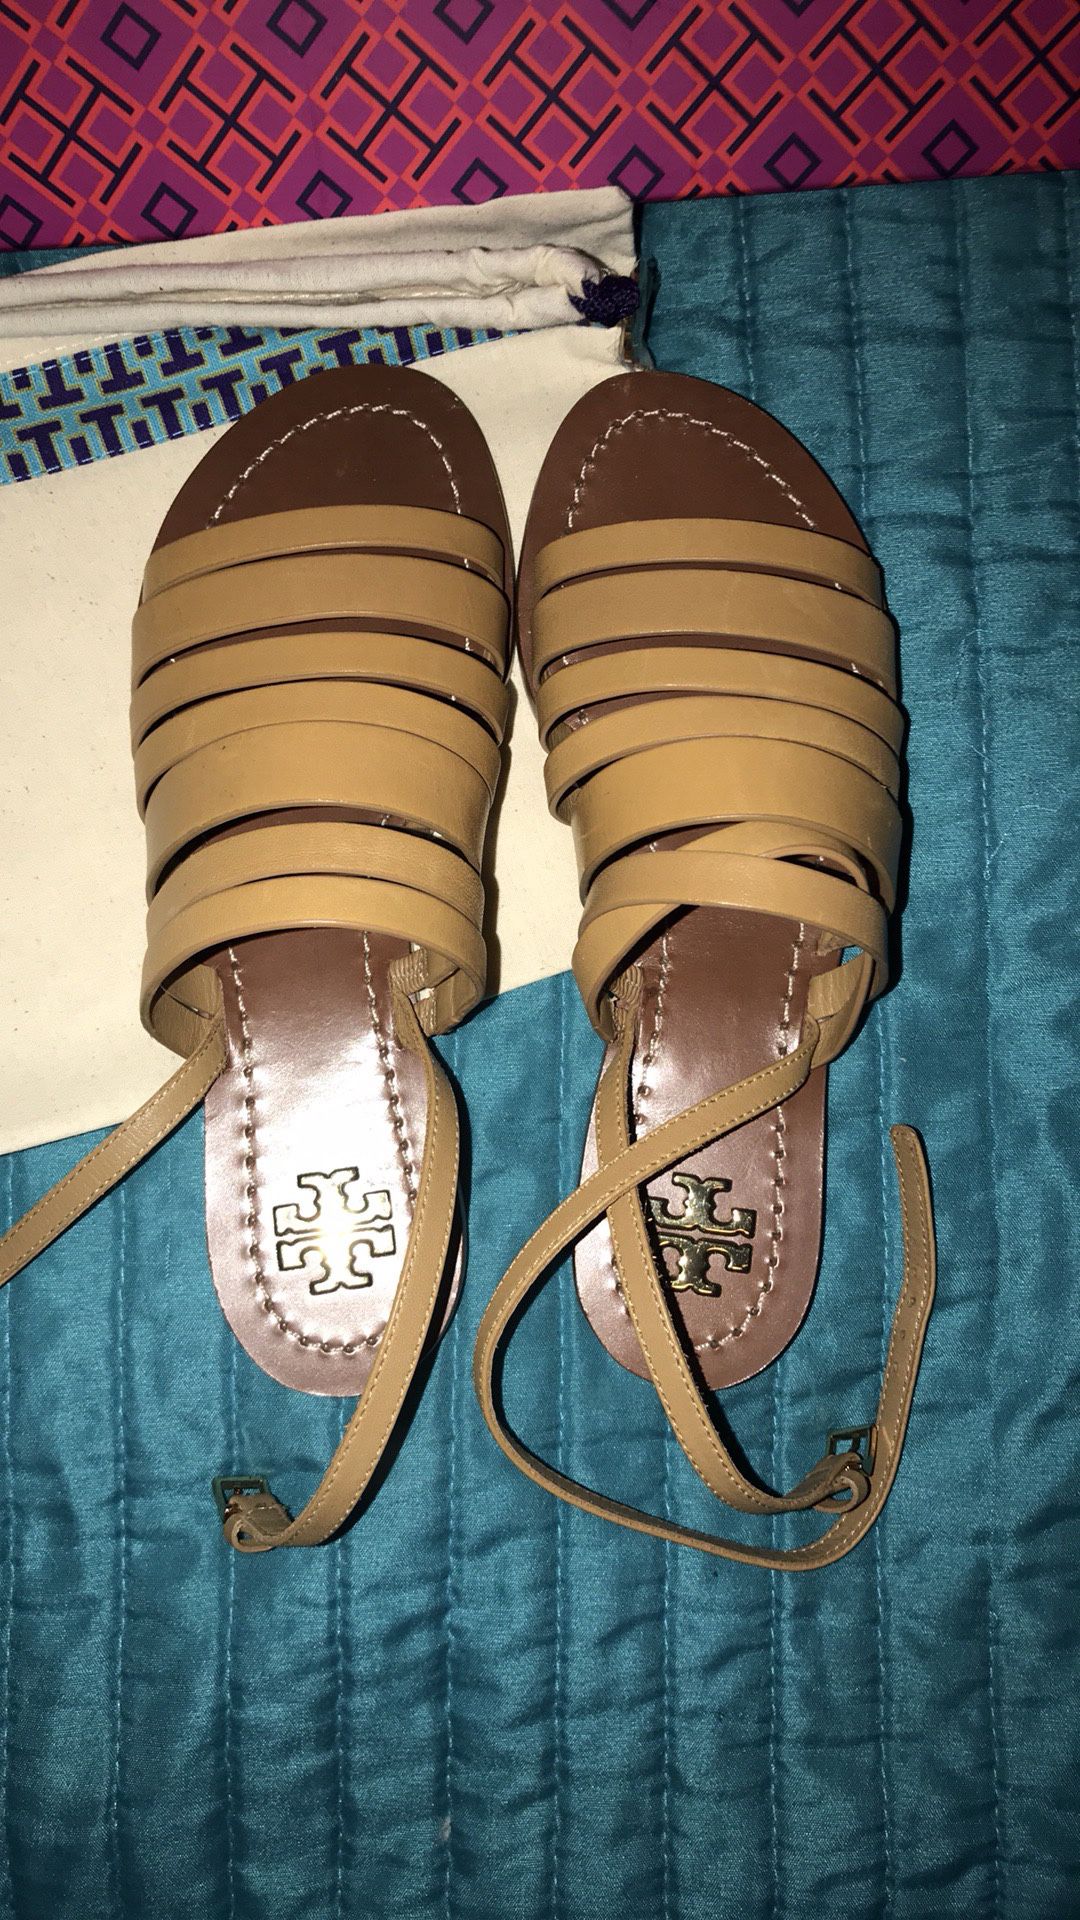 Tory Burch sandal for Sale in Albuquerque, NM - OfferUp